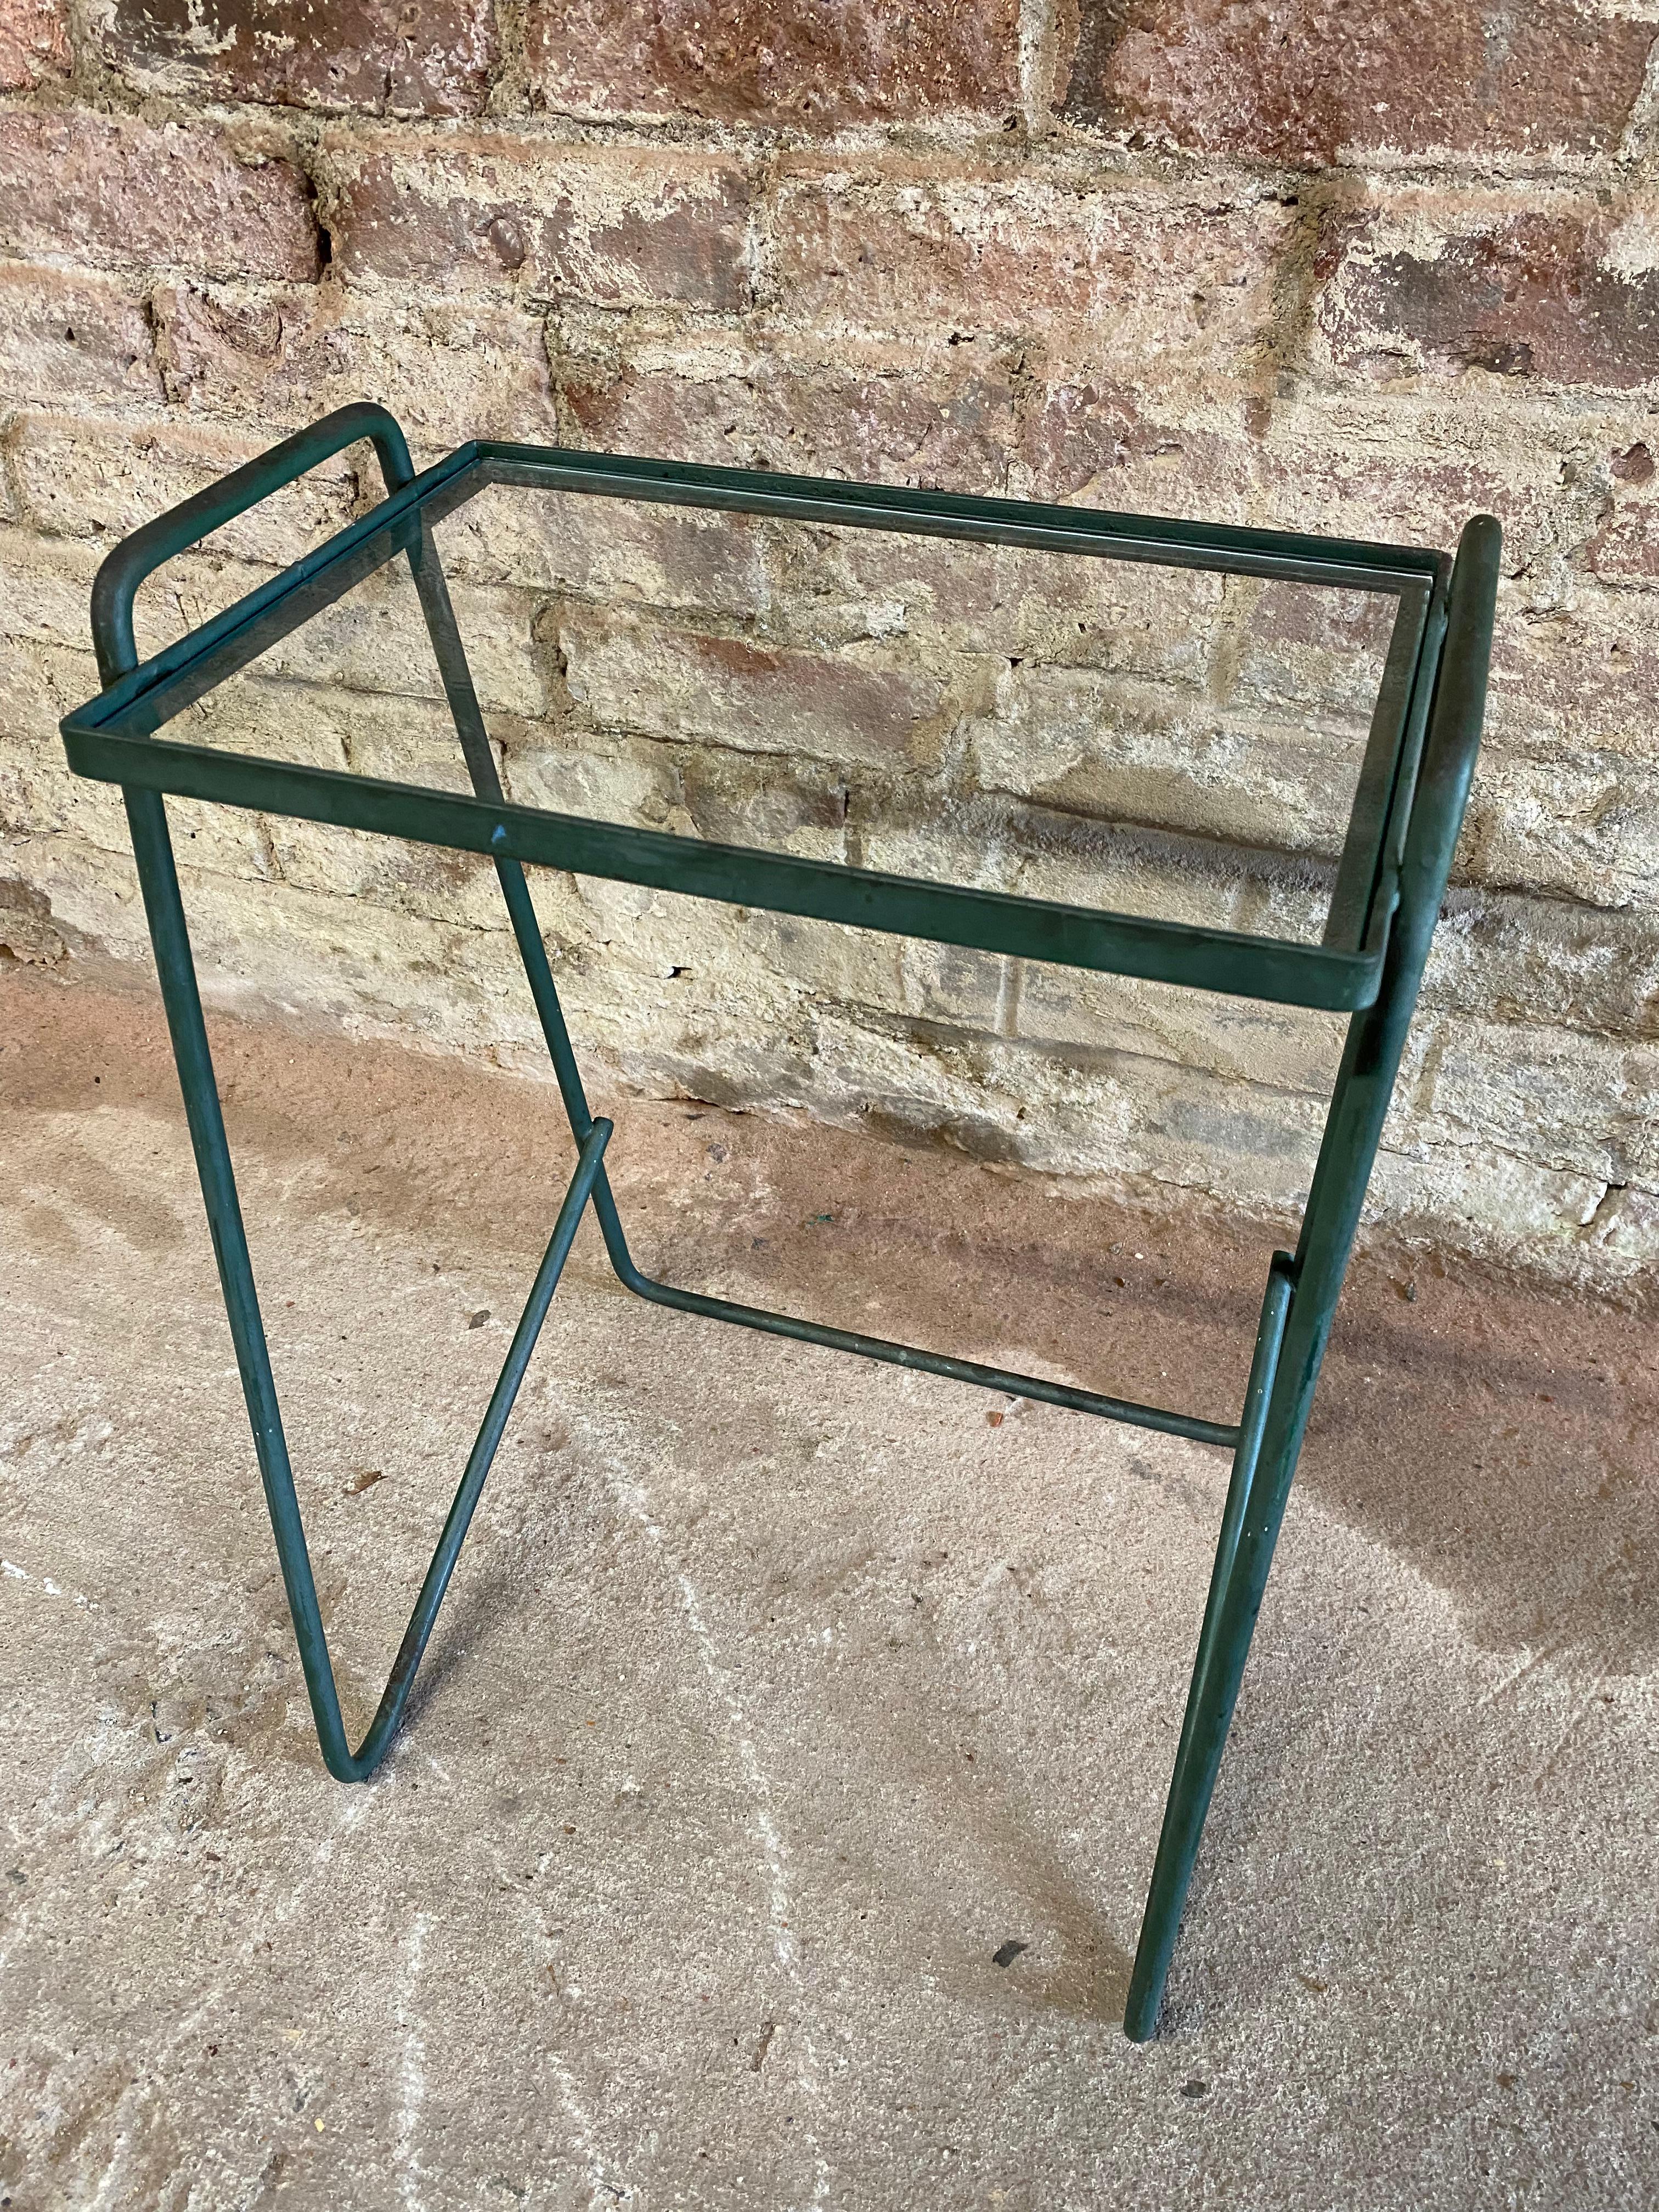 Iron and glass top hairpin leg end table. Sweet accent table for any space in the home. Circa 1950. Green iron frame with glass insert. Good overall condition with some scuffs and finish losses.

Measures: Approximately 11.5